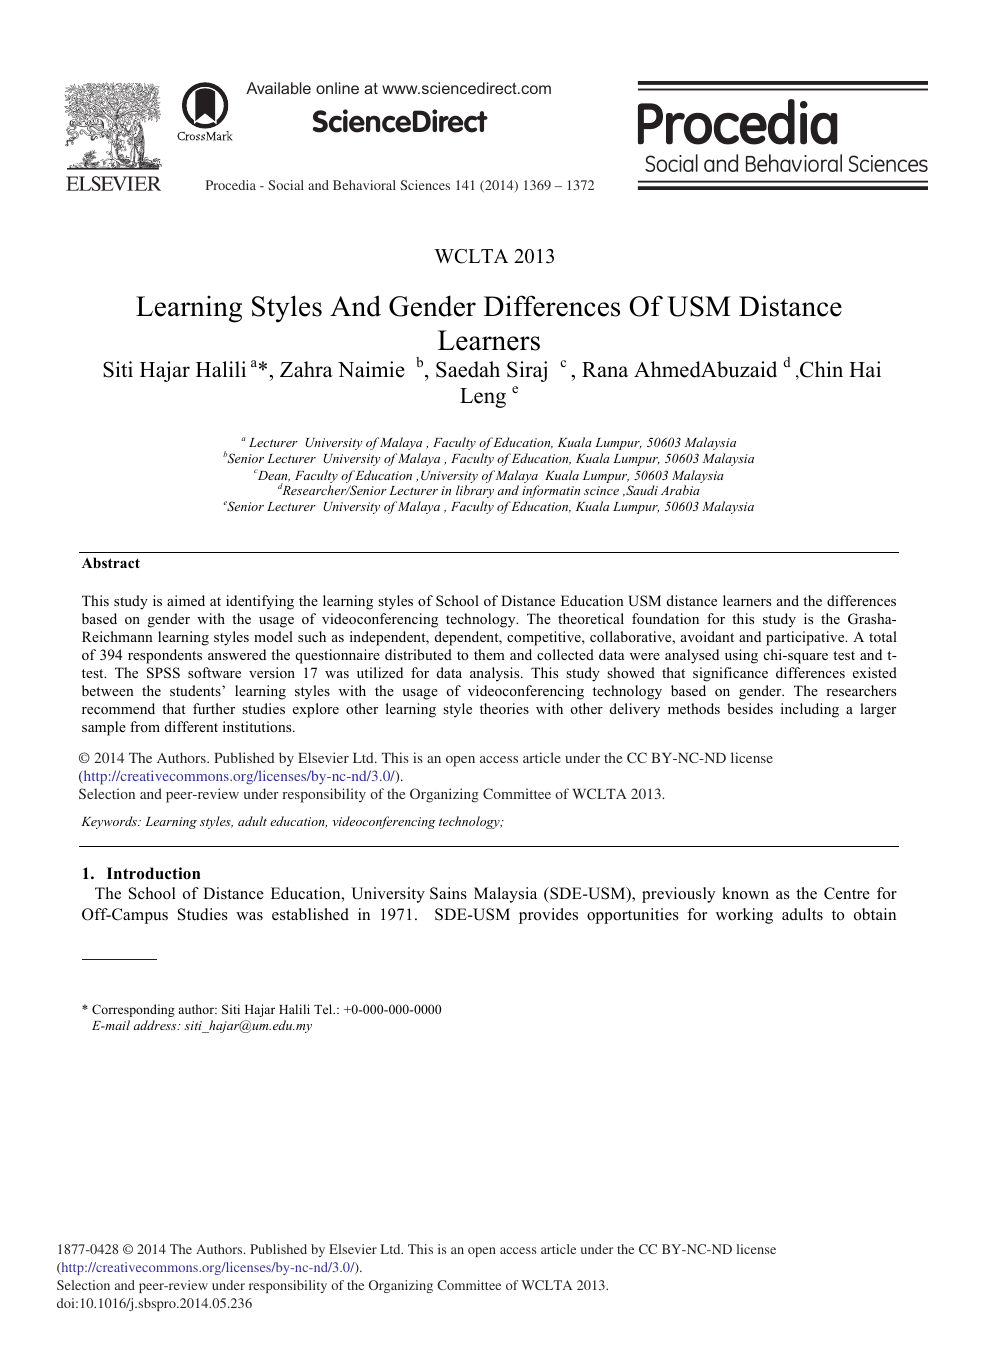 Learning Styles And Gender Differences Of Usm Distance Learners Topic Of Research Paper In Economics And Business Download Scholarly Article Pdf And Read For Free On Cyberleninka Open Science Hub